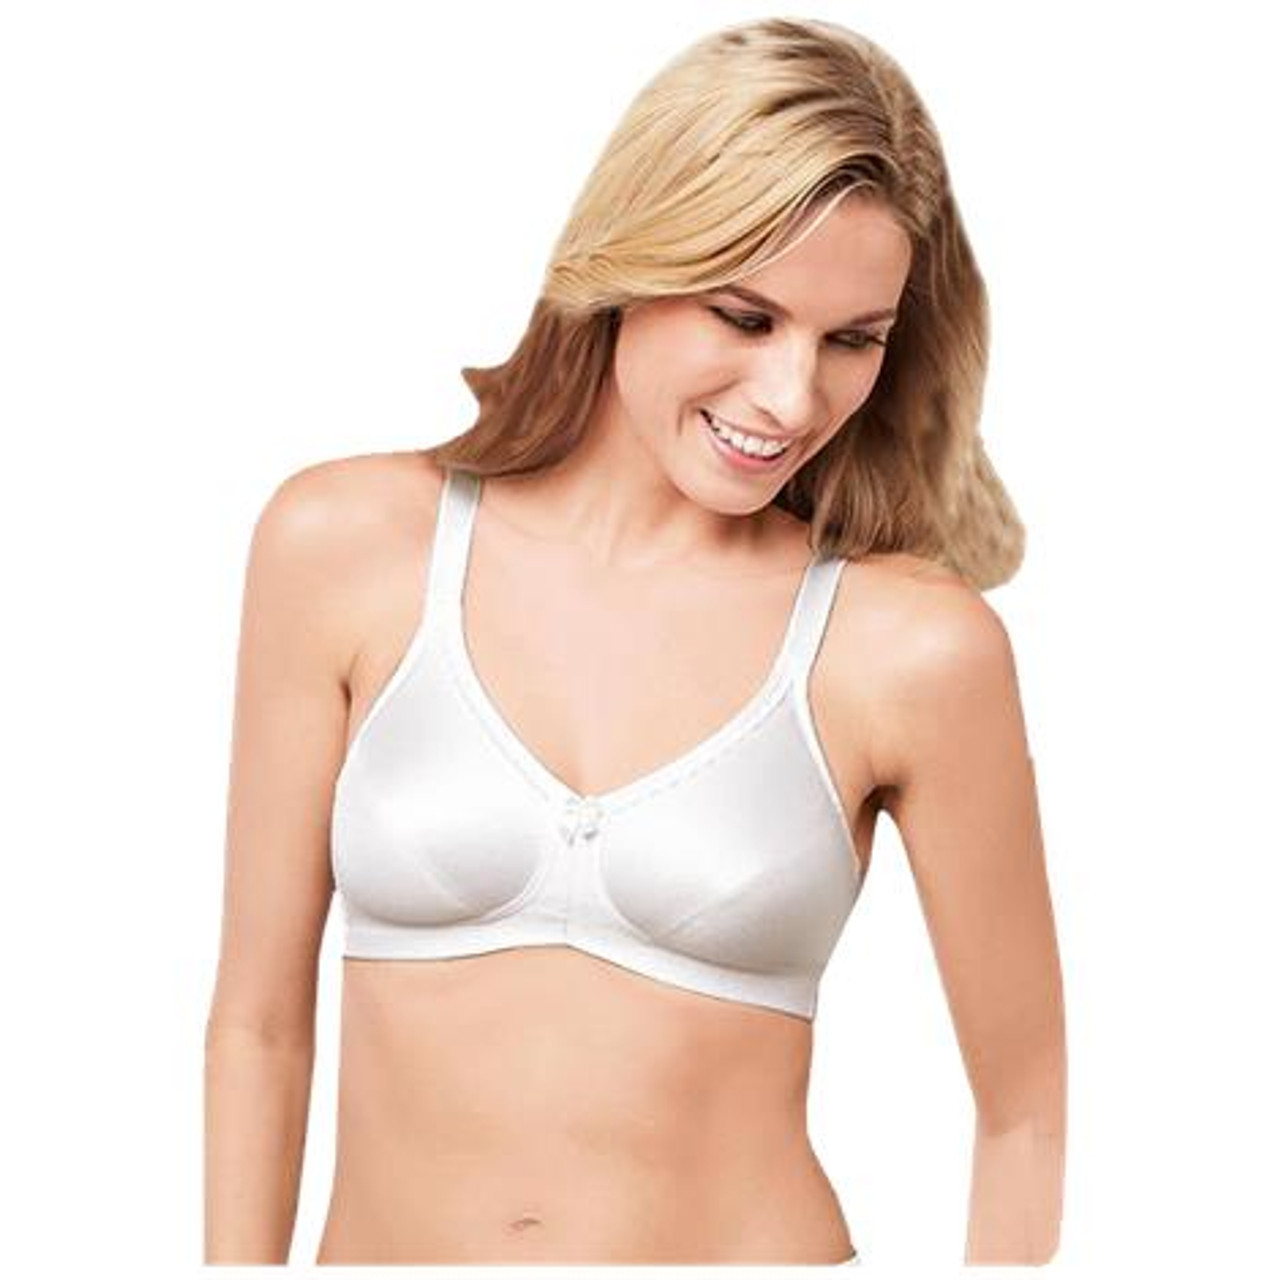 Amoena Rita Non-Wired Mastectomy Bra  The Fitting Service – The Fitting  Service